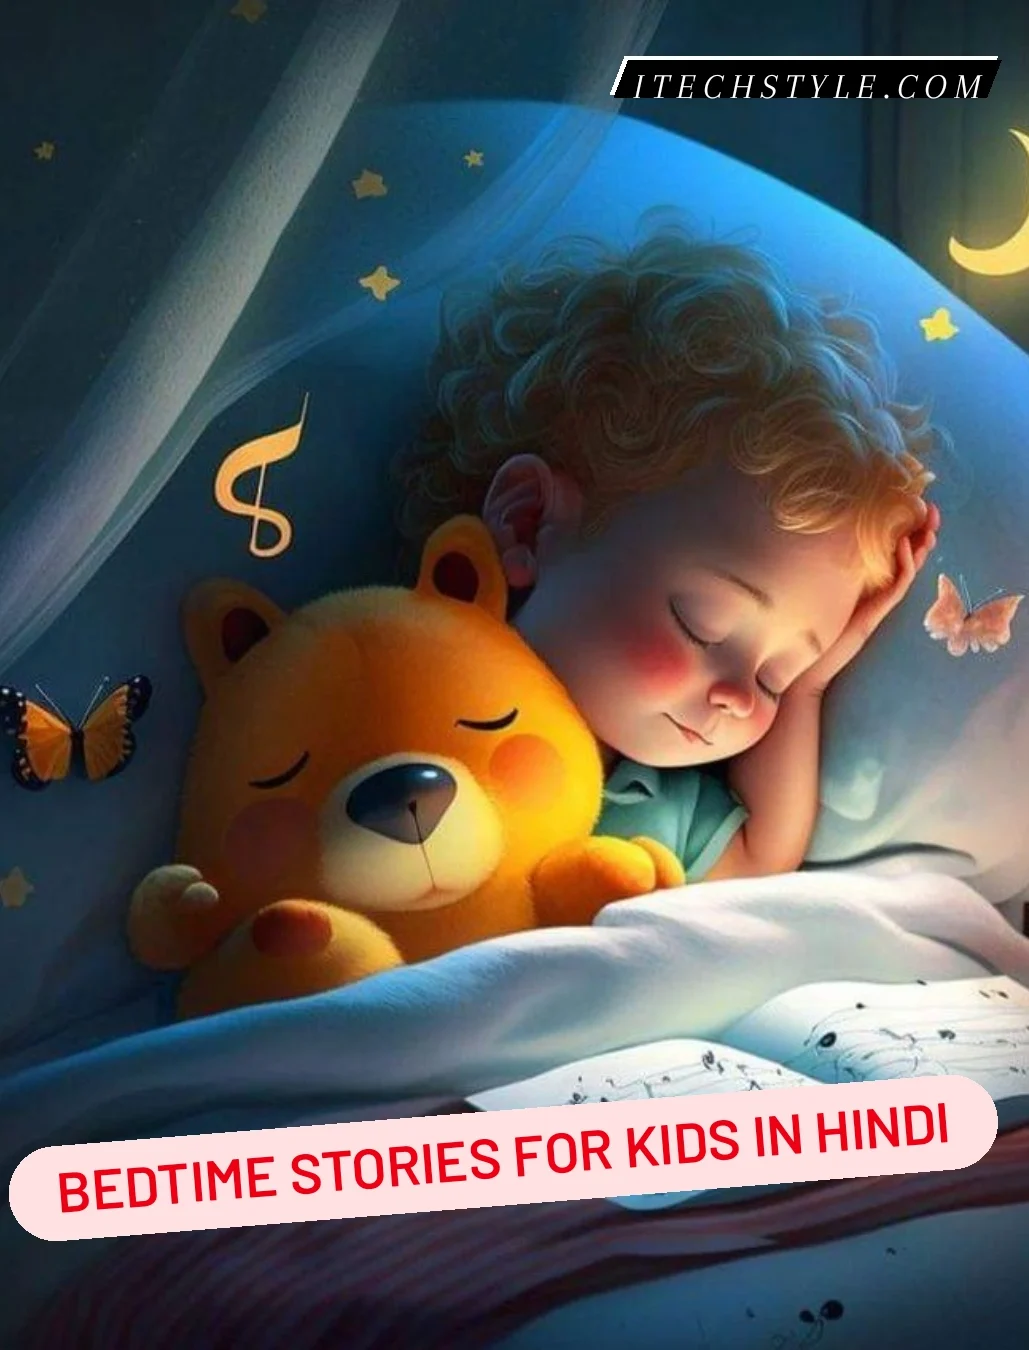 Bedtime Stories for kids in hindi